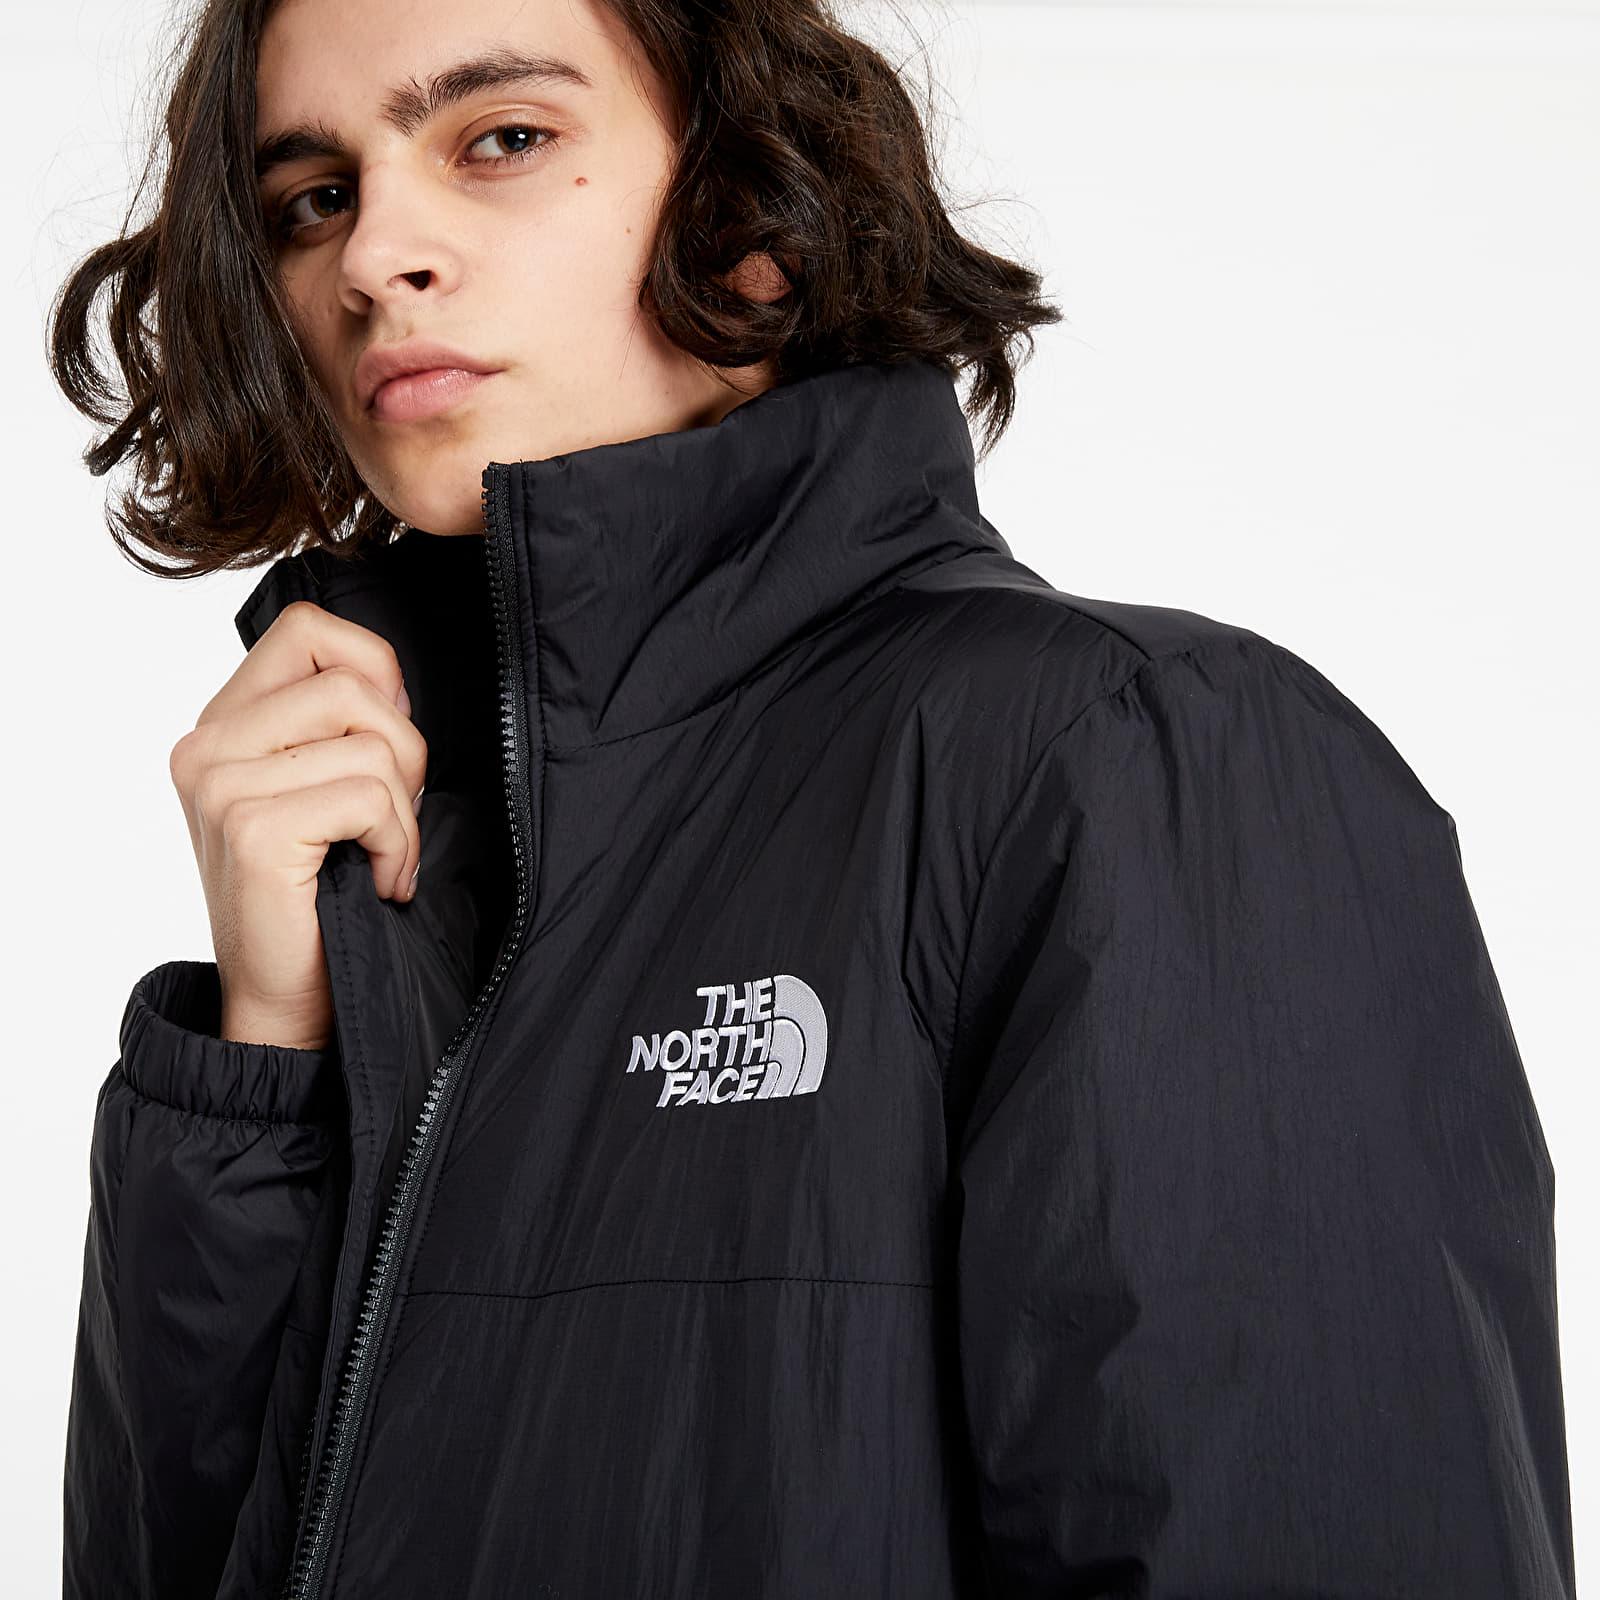 The North Face Gosei Puffer Jacket Black for Men - Lyst